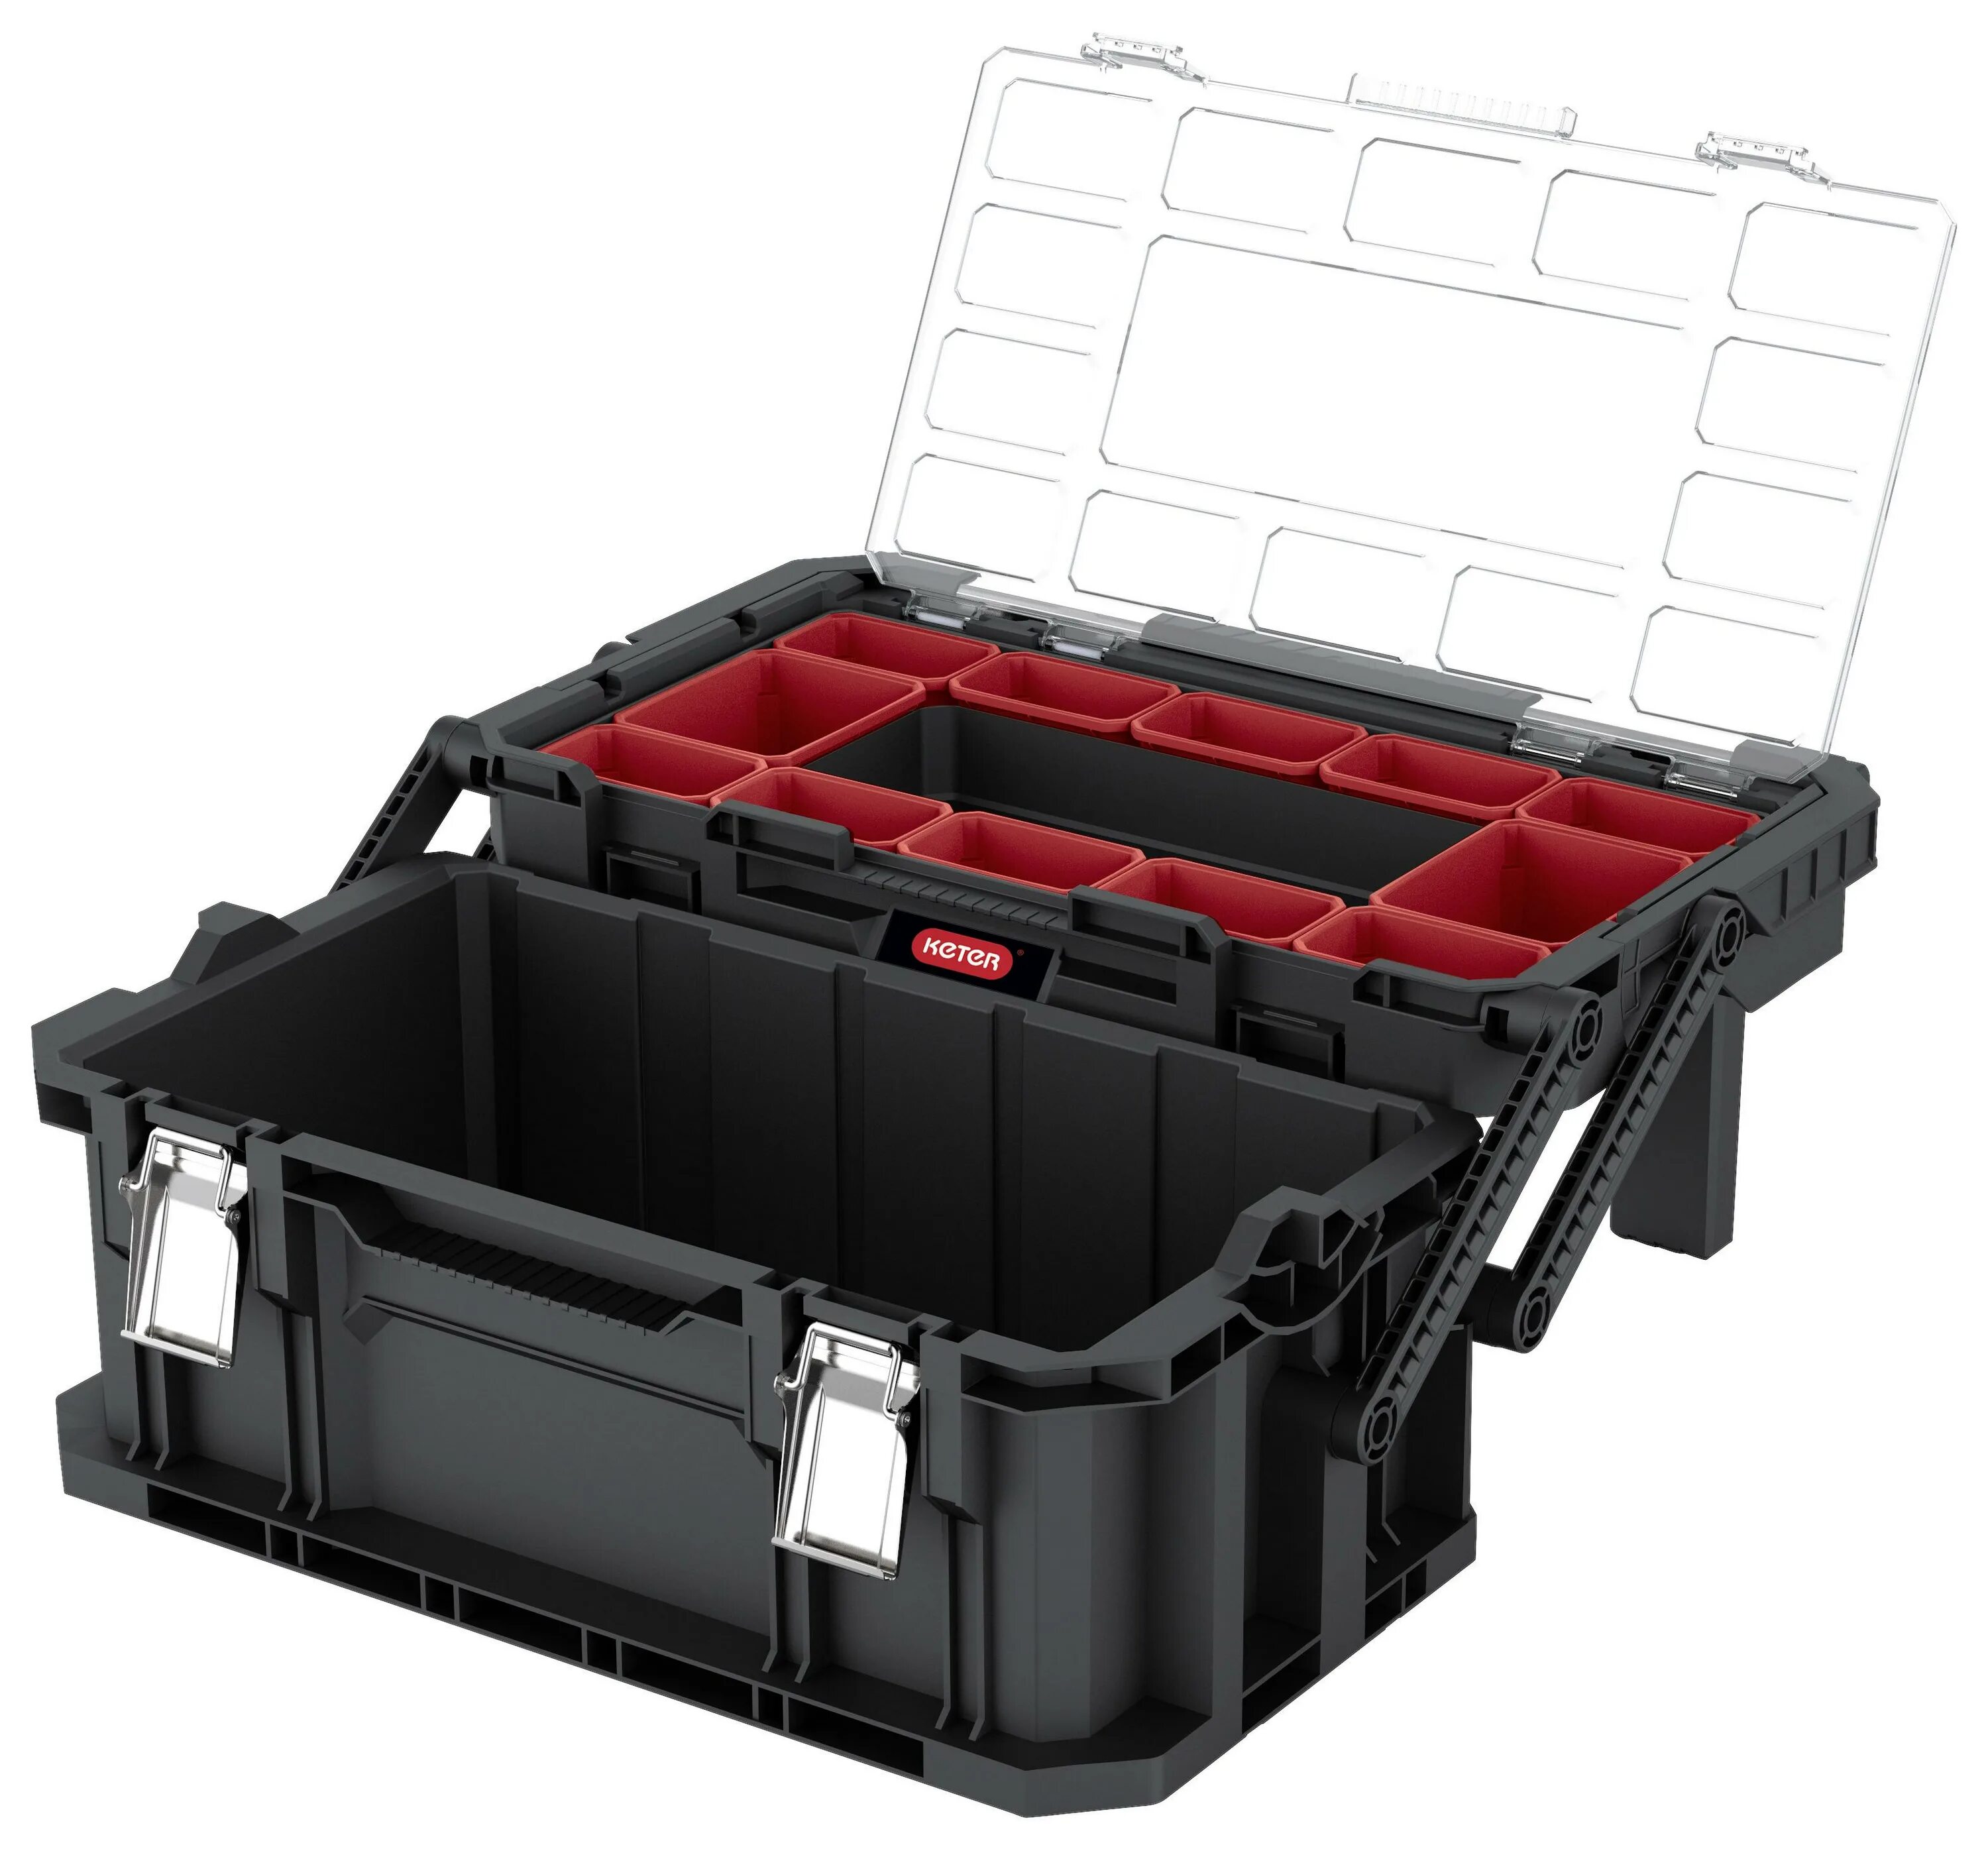 Keter connect Cantilever Tool Box. Keter connect Cantilever Tool Box 17203104. Ящик для инструмента "connect Cantiliver Tool Box" 56,5*31,7*25,1 см (черный) "Keter". Keter connect 250037. Connect tool